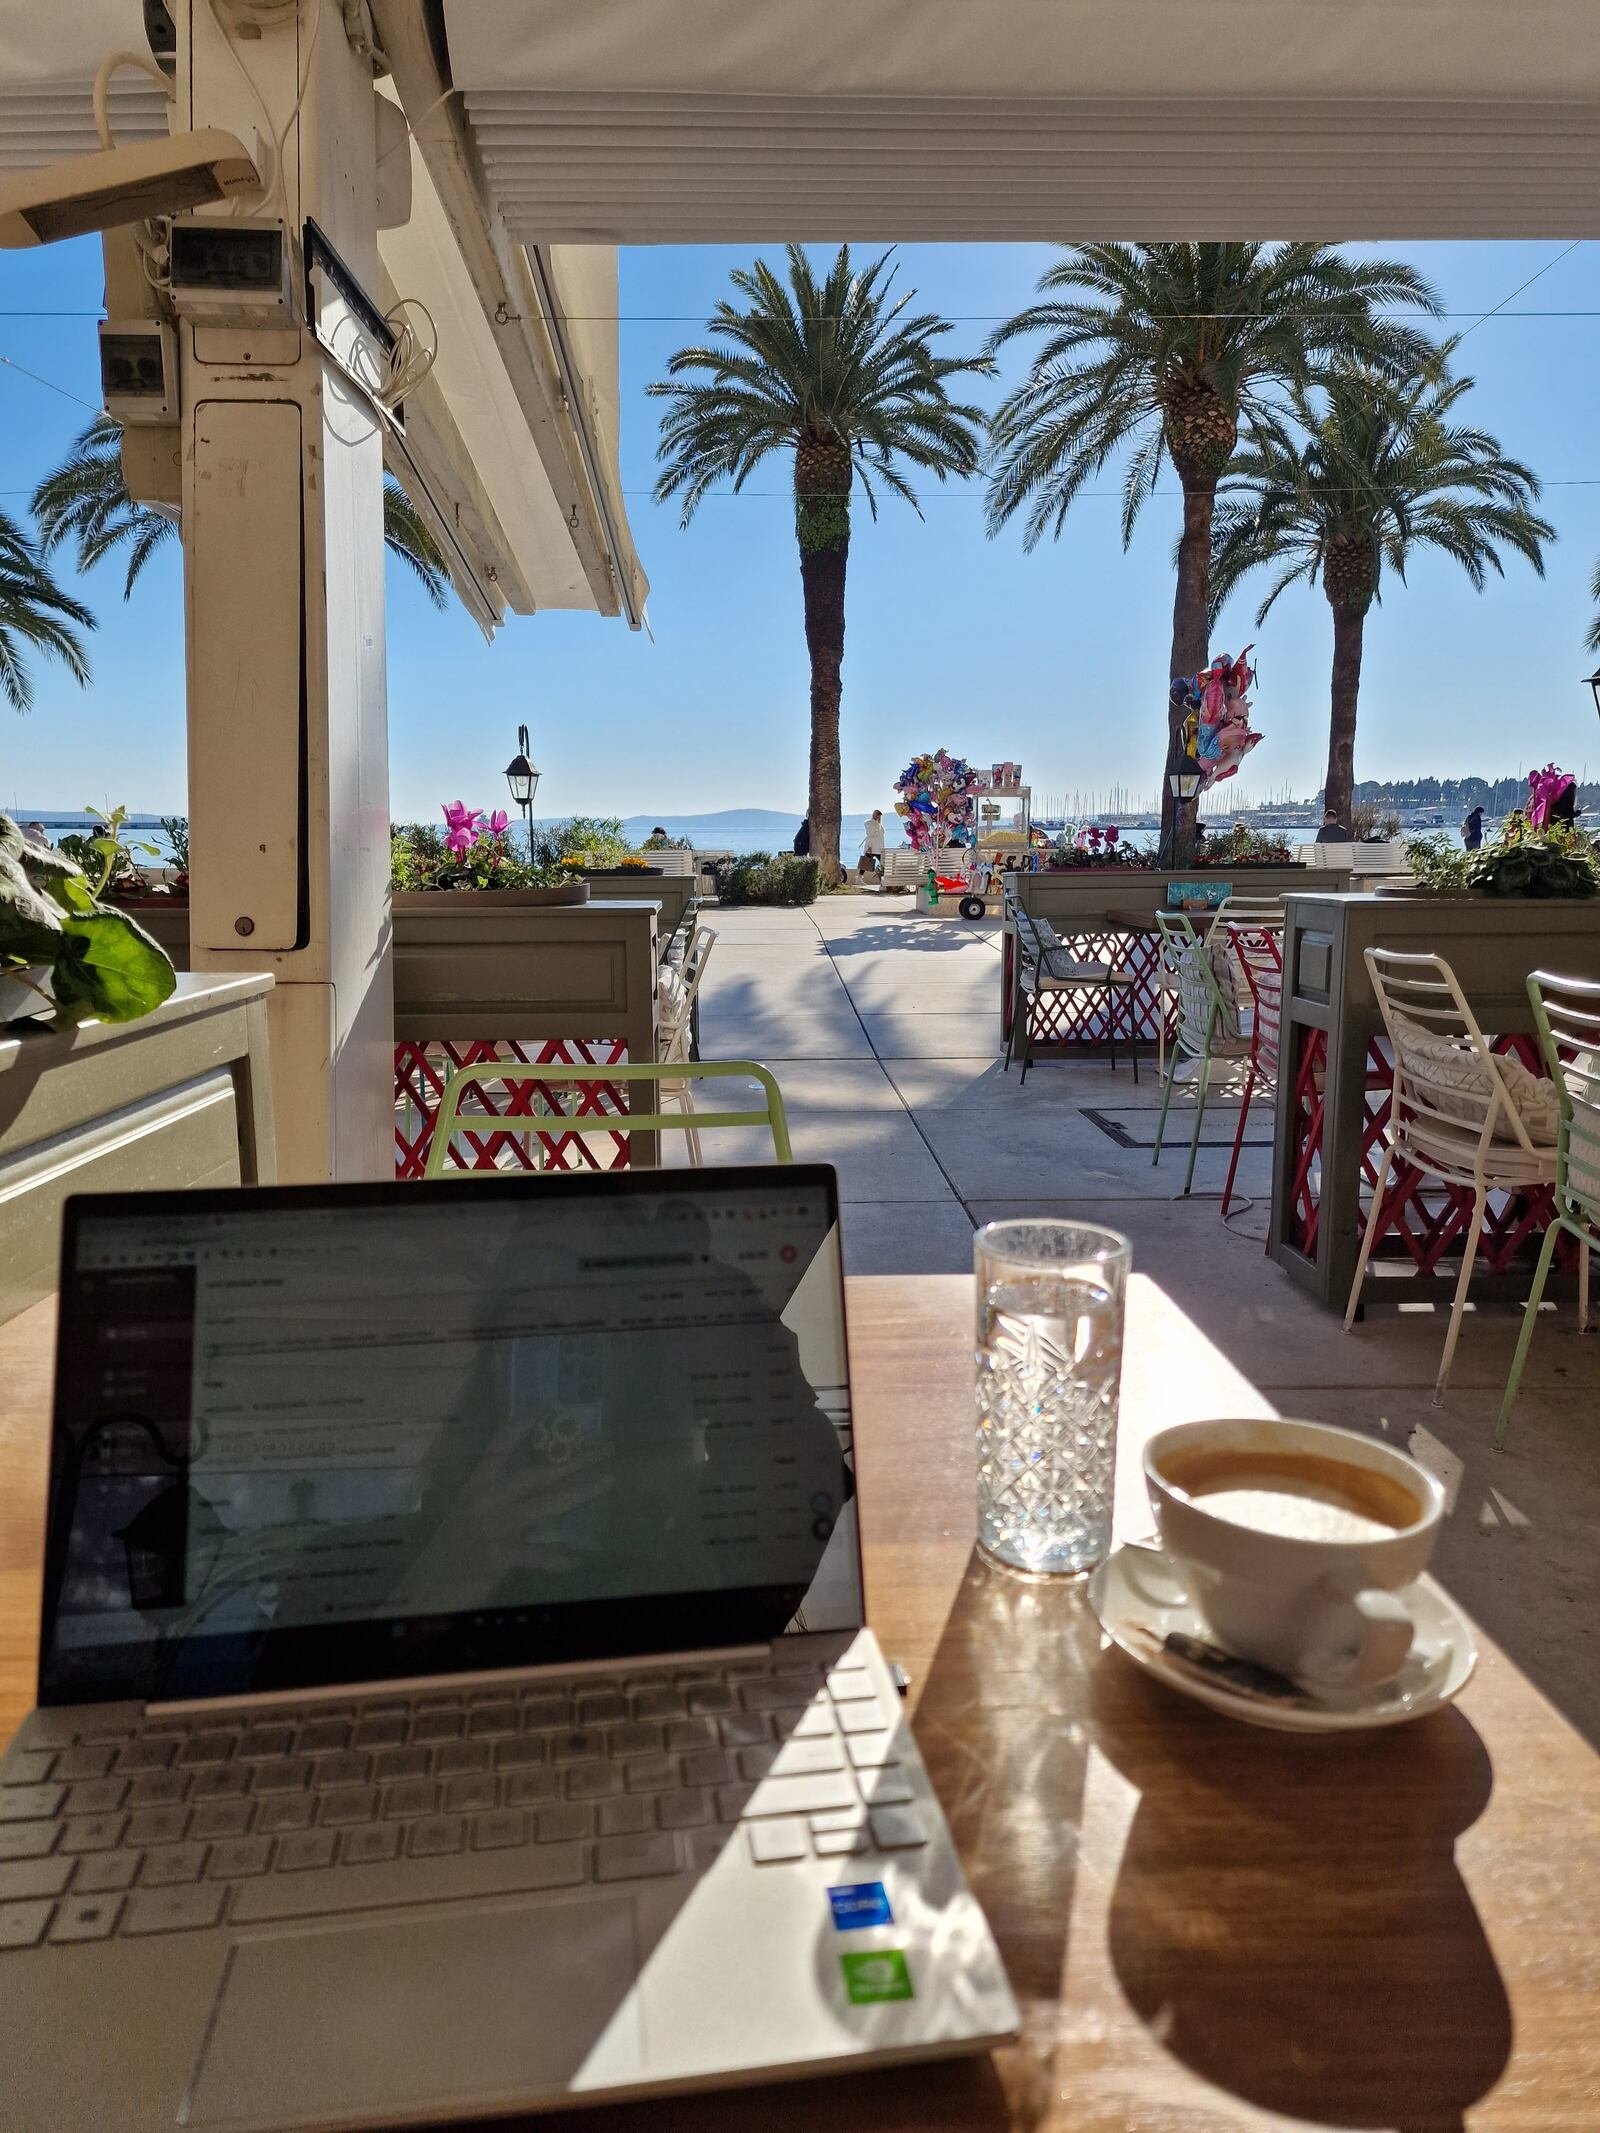 a laptop on a cafe table with coffee and water next to it, the view is outside of a sea harbour with blue sky and palm trees